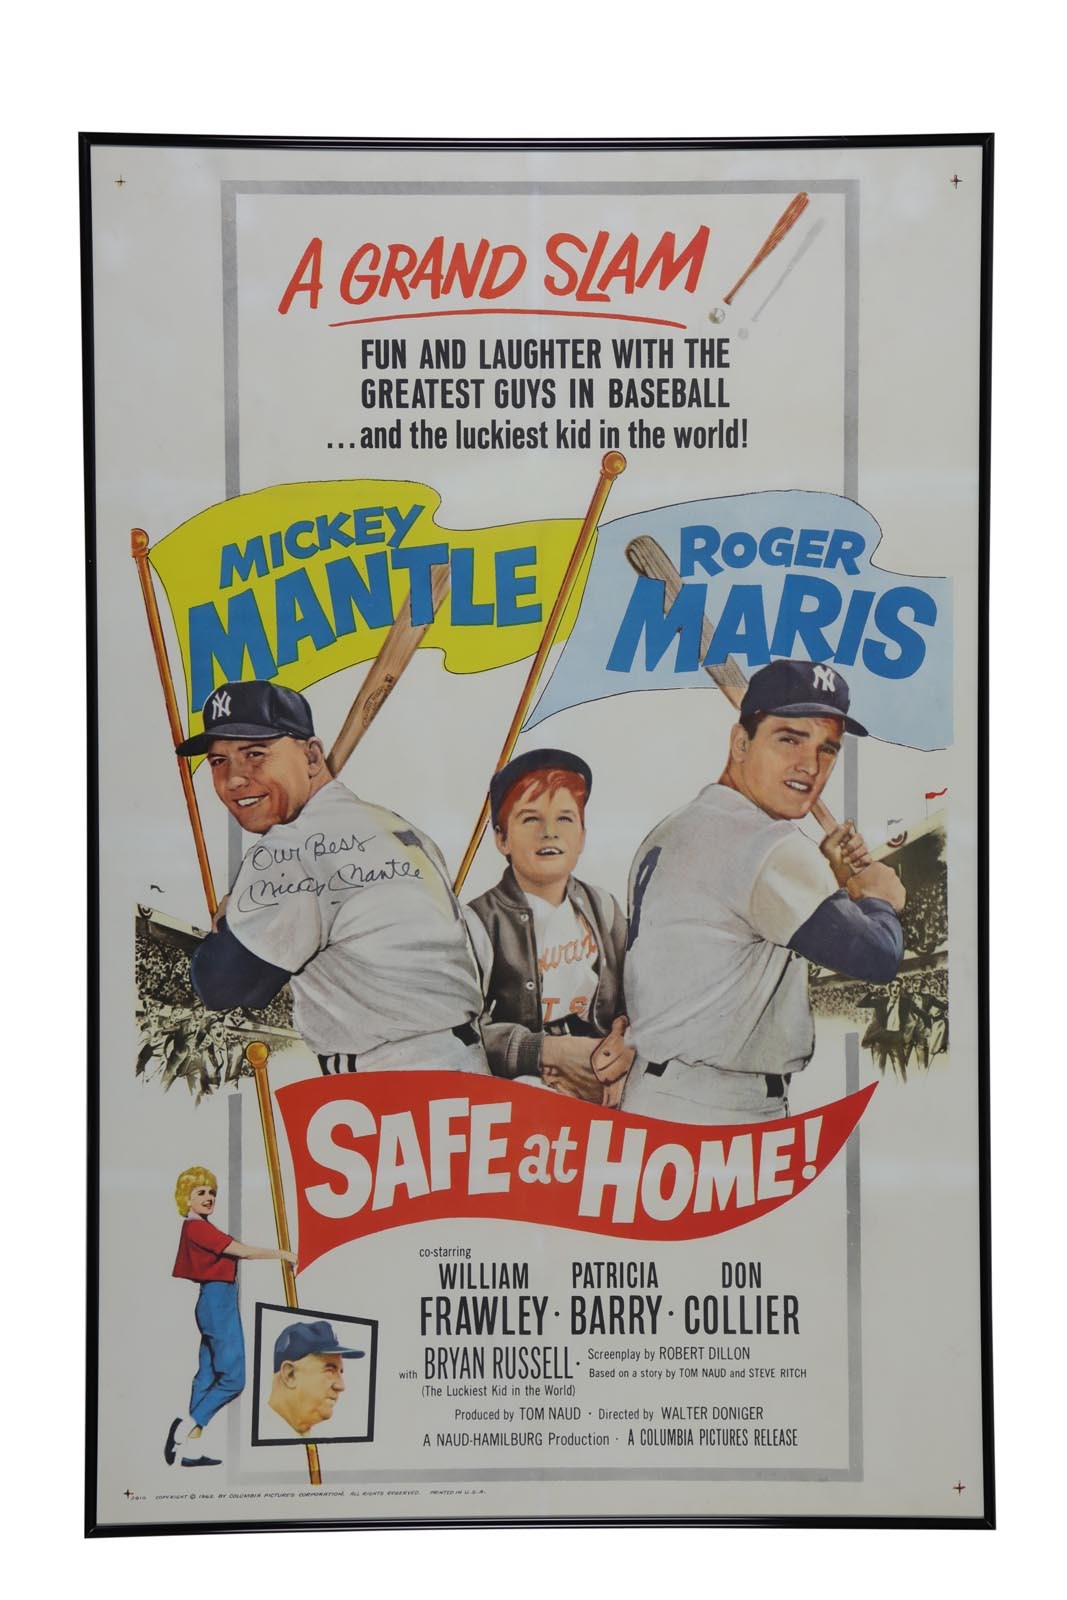 Mantle and Maris - Mickey Mantle Signed "Safe at Home" One-Sheet Movie Poster